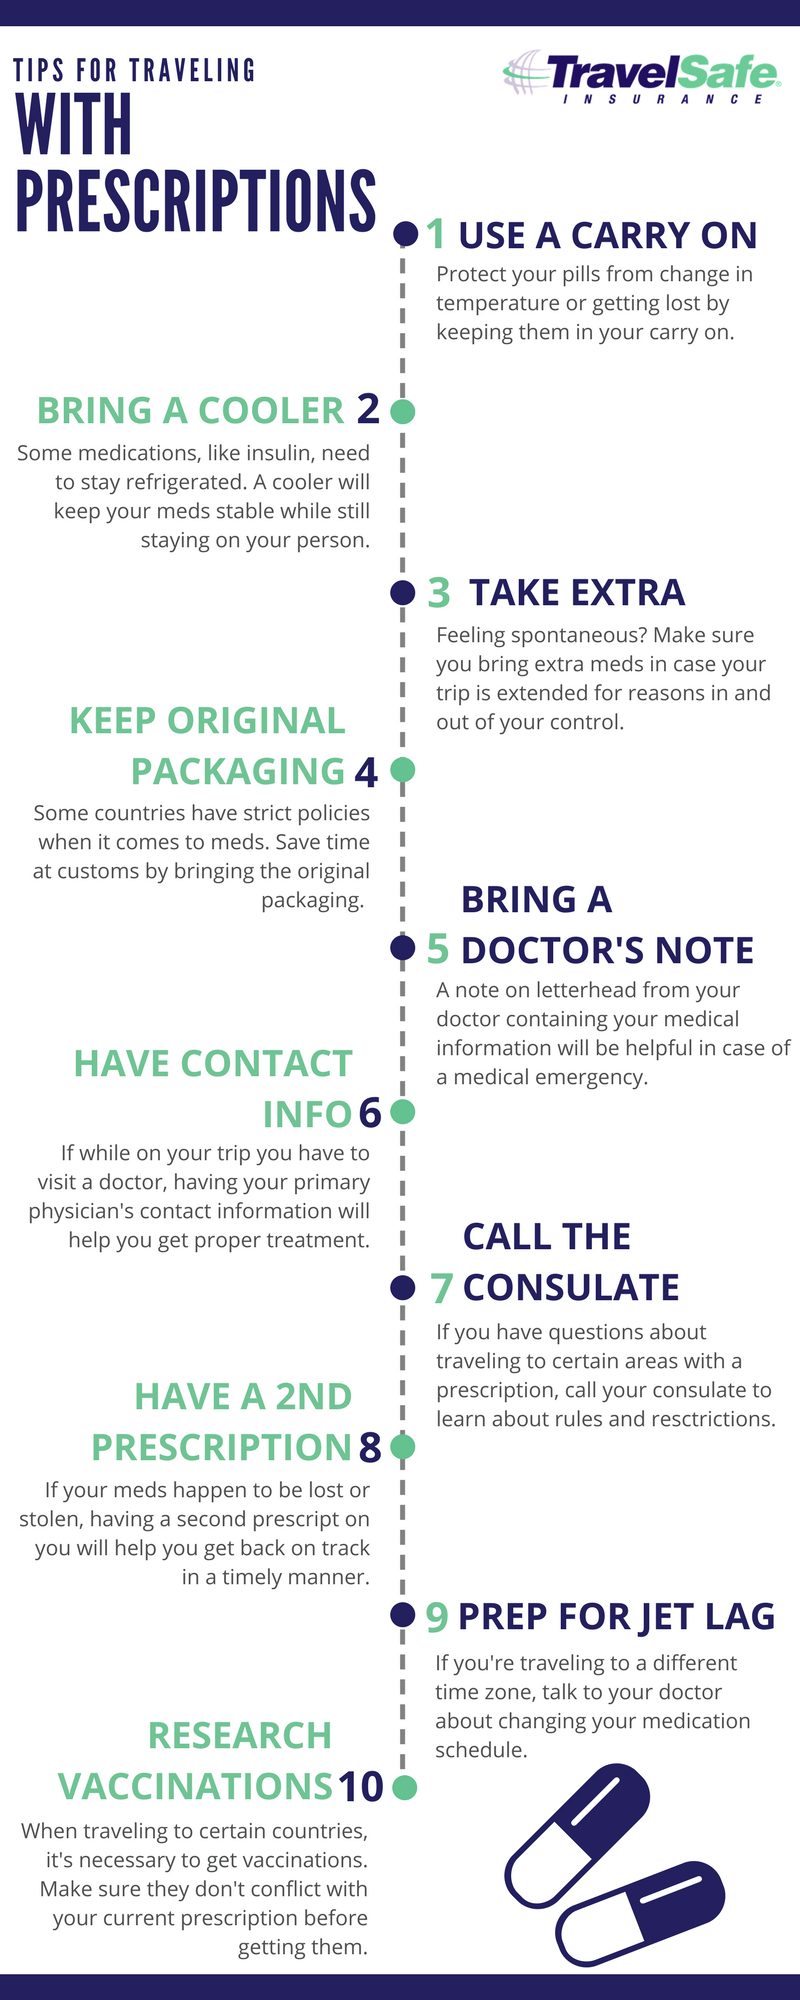 10 tips to traveling with prescriptions (1).png